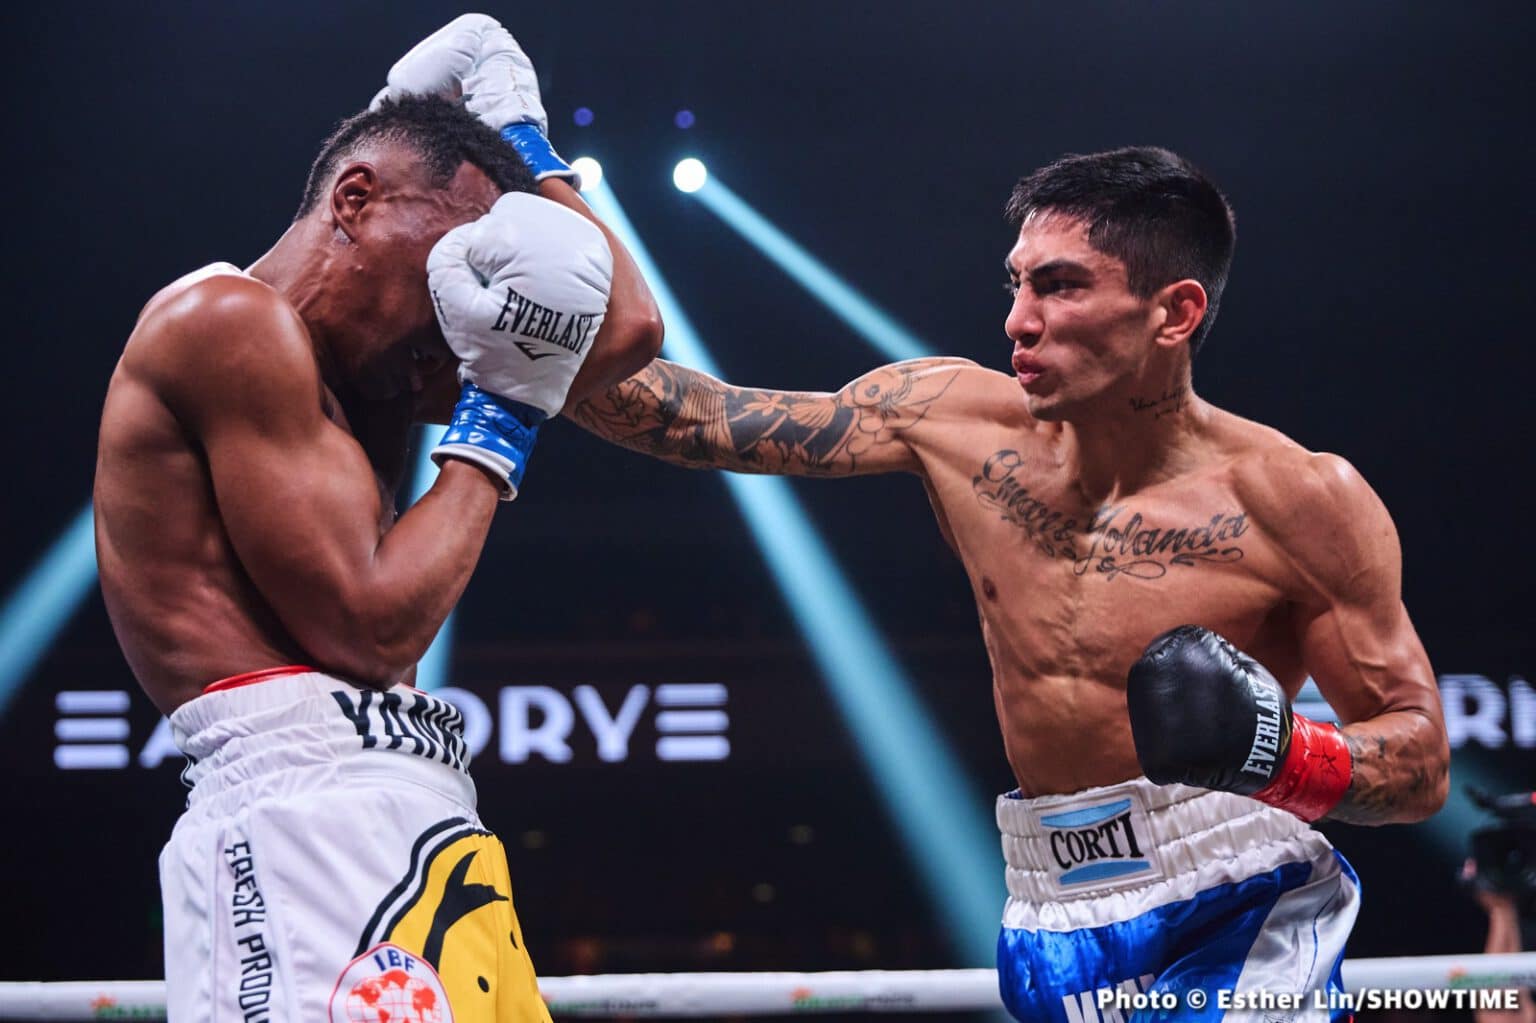 Matias stops Ponce in 5th, captures IBF 140-lb title - Boxing results